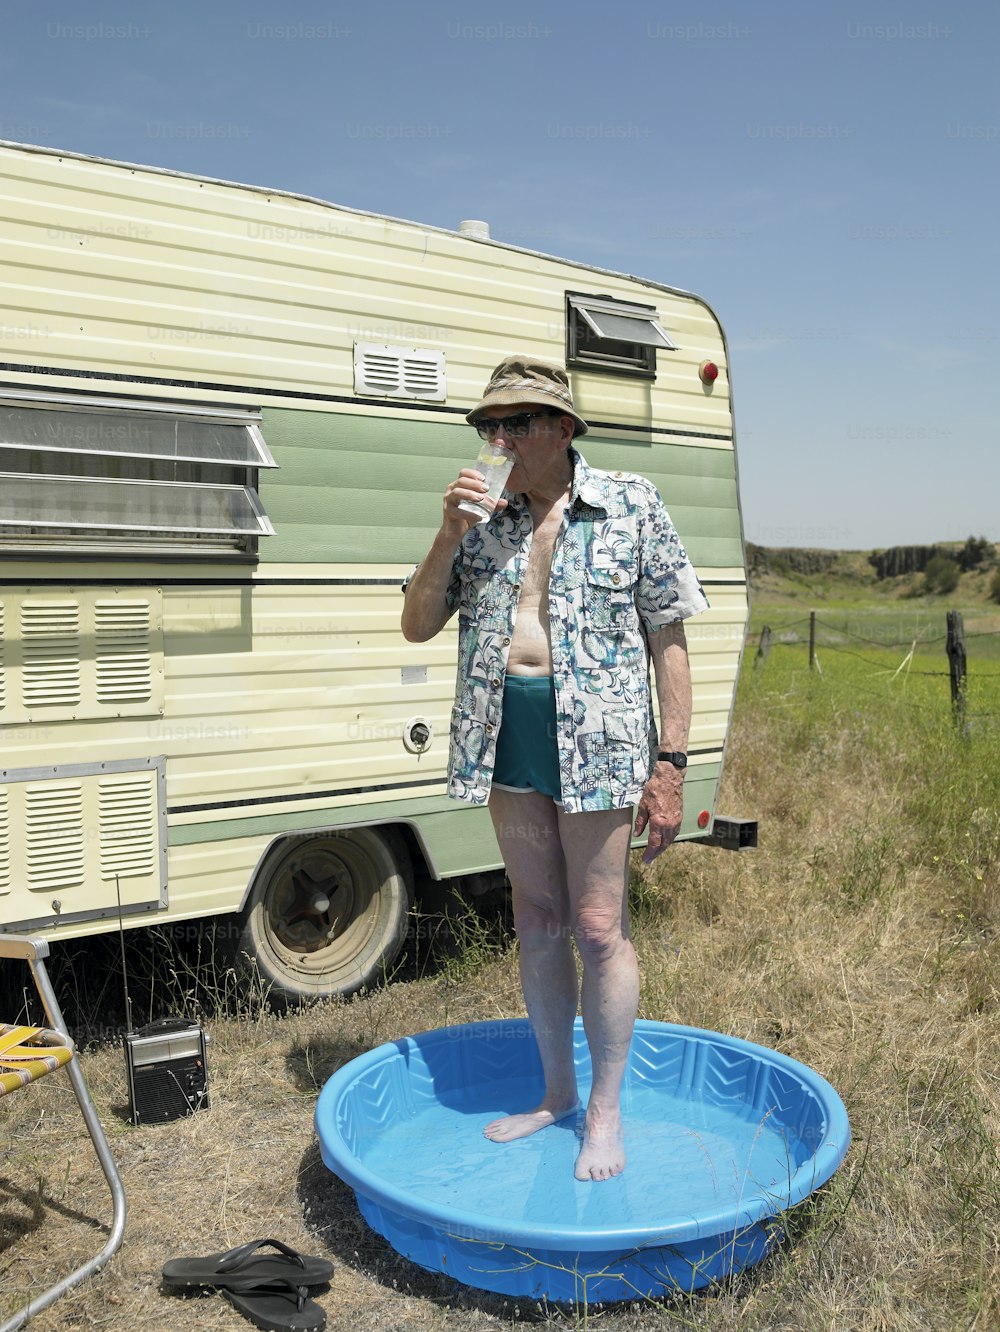 a woman standing on a blue frisbee in front of a trailer